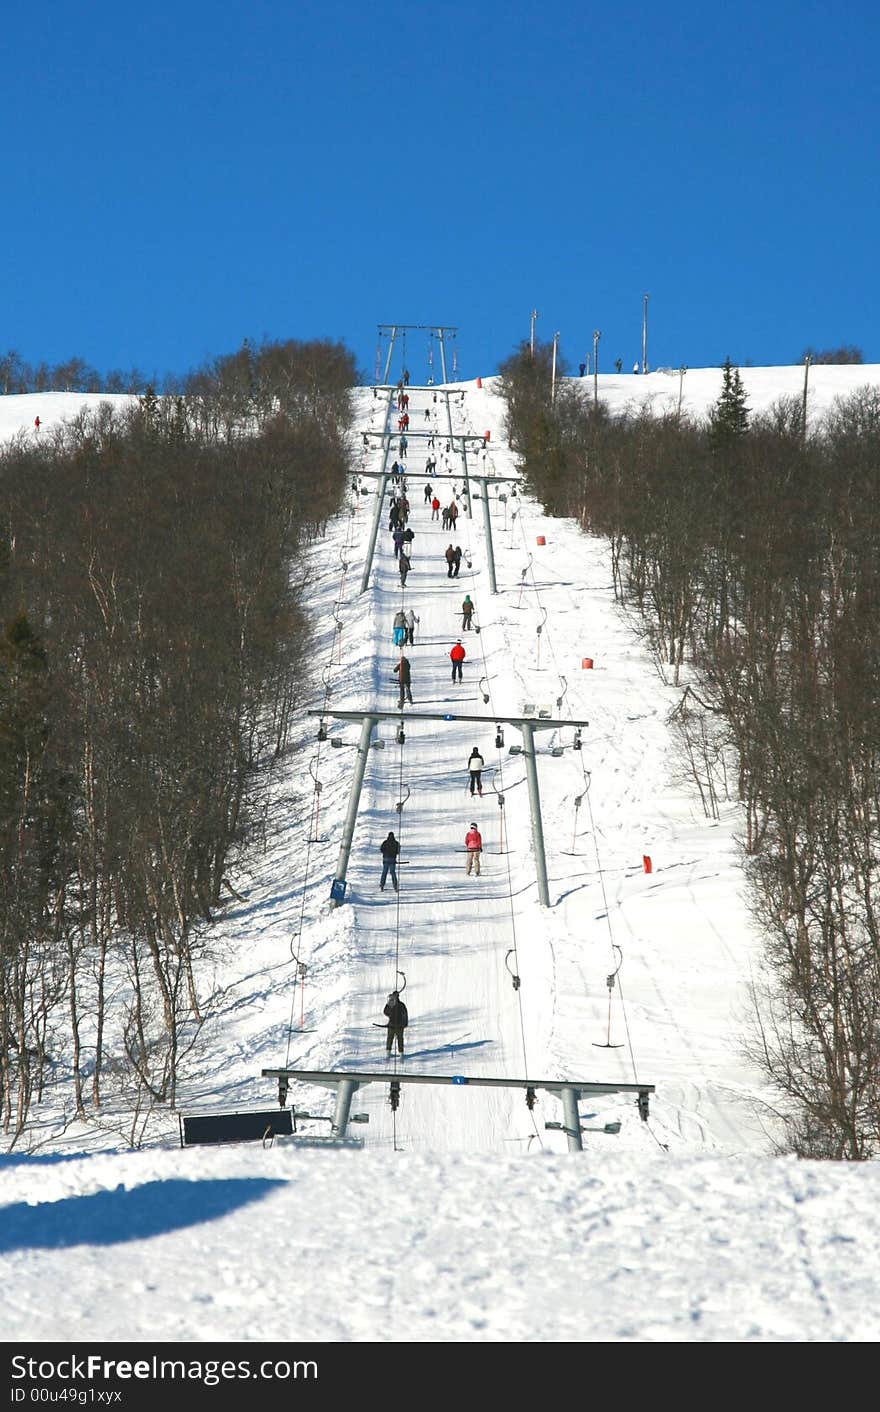 Tourists being transported uphill in a ski lift